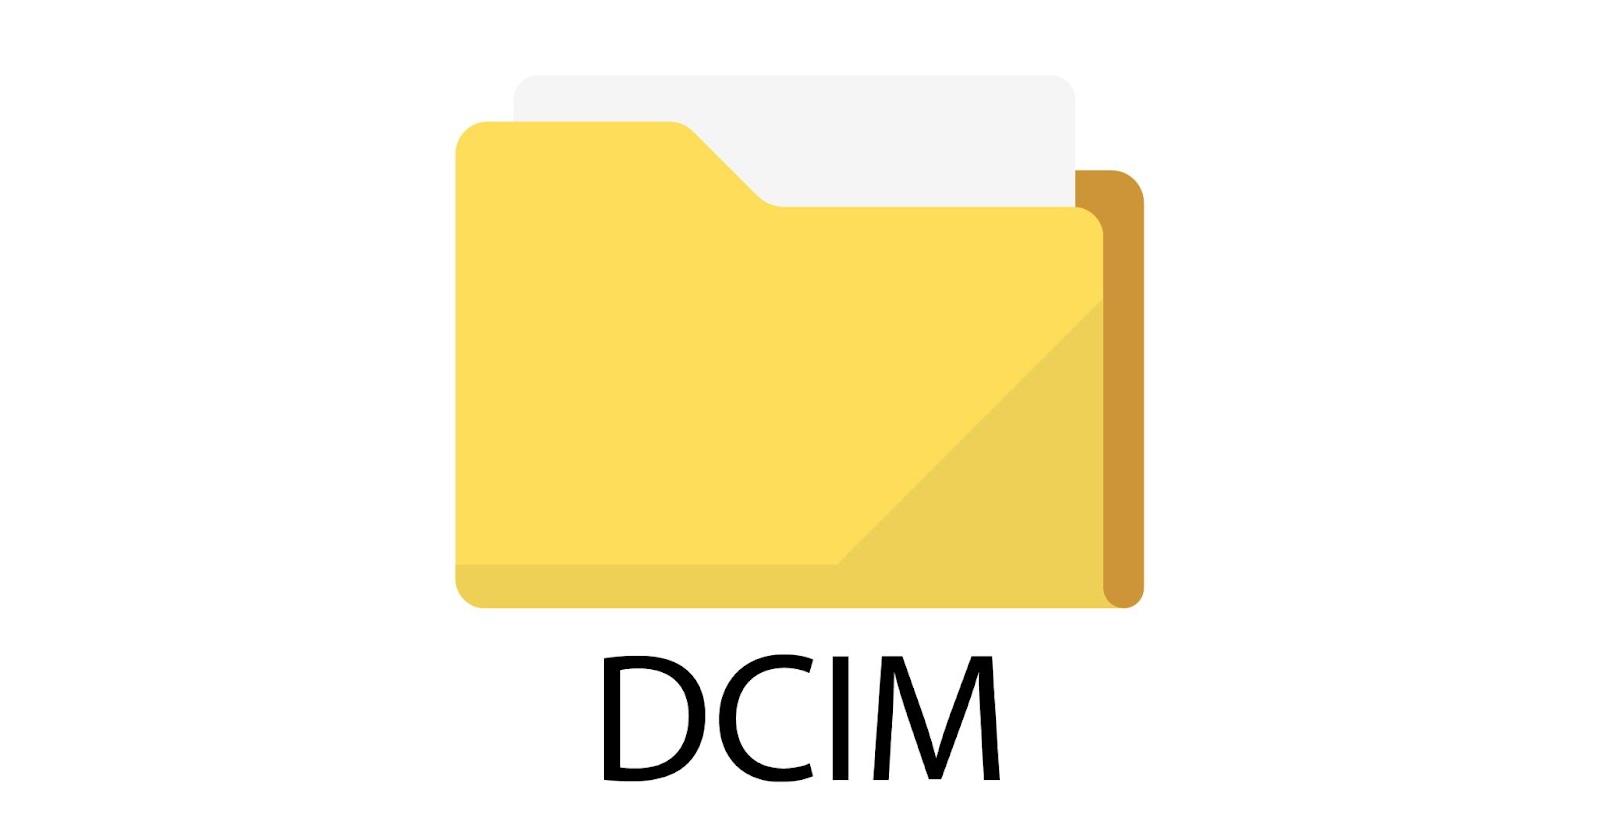 Look for the DCIM folder